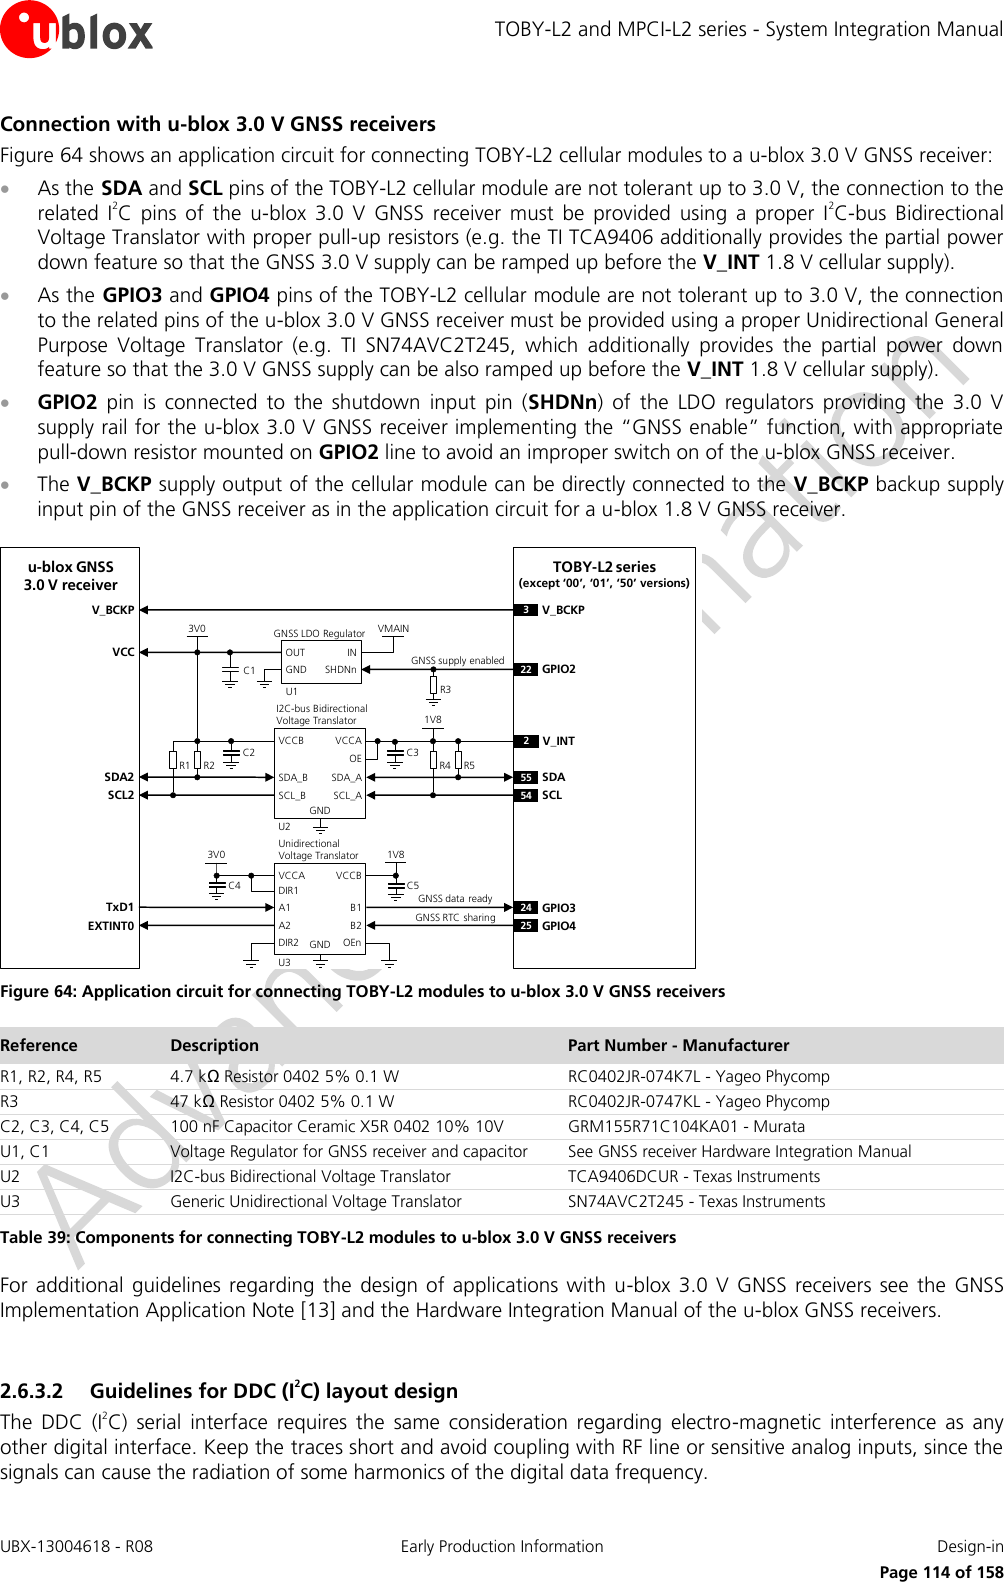 TOBY-L2 and MPCI-L2 series - System Integration Manual UBX-13004618 - R08  Early Production Information  Design-in     Page 114 of 158 Connection with u-blox 3.0 V GNSS receivers Figure 64 shows an application circuit for connecting TOBY-L2 cellular modules to a u-blox 3.0 V GNSS receiver:  As the SDA and SCL pins of the TOBY-L2 cellular module are not tolerant up to 3.0 V, the connection to the related  I2C  pins  of  the  u-blox  3.0  V  GNSS  receiver  must  be  provided  using  a  proper  I2C-bus  Bidirectional Voltage Translator with proper pull-up resistors (e.g. the TI TCA9406 additionally provides the partial power down feature so that the GNSS 3.0 V supply can be ramped up before the V_INT 1.8 V cellular supply).  As the GPIO3 and GPIO4 pins of the TOBY-L2 cellular module are not tolerant up to 3.0 V, the connection to the related pins of the u-blox 3.0 V GNSS receiver must be provided using a proper Unidirectional General Purpose  Voltage  Translator  (e.g.  TI  SN74AVC2T245,  which  additionally  provides  the  partial  power  down feature so that the 3.0 V GNSS supply can be also ramped up before the V_INT 1.8 V cellular supply).  GPIO2  pin  is  connected  to  the  shutdown  input  pin  (SHDNn)  of  the  LDO  regulators  providing  the  3.0  V supply rail for the u-blox 3.0 V GNSS receiver implementing the “GNSS enable” function, with appropriate pull-down resistor mounted on GPIO2 line to avoid an improper switch on of the u-blox GNSS receiver.  The V_BCKP supply output of the cellular module can be directly connected to the V_BCKP backup supply input pin of the GNSS receiver as in the application circuit for a u-blox 1.8 V GNSS receiver. u-blox GNSS 3.0 V receiver24 GPIO325 GPIO41V8B1 A1GNDU3B2A2VCCBVCCAUnidirectionalVoltage TranslatorC4 C53V0TxD1EXTINT0R1INOUTGNSS LDO RegulatorSHDNnR2VMAIN3V0U122 GPIO255 SDA54 SCLR4 R51V8SDA_A SDA_BGNDU2SCL_ASCL_BVCCAVCCBI2C-bus Bidirectional Voltage Translator2V_INTC1C2 C3R3SDA2SCL2VCCDIR1DIR23V_BCKPV_BCKPOEnOEGNSS data readyGNSS RTC sharingGNSS supply enabledTOBY-L2 series       (except ‘00’, ‘01’, ‘50’ versions)GND Figure 64: Application circuit for connecting TOBY-L2 modules to u-blox 3.0 V GNSS receivers Reference Description Part Number - Manufacturer R1, R2, R4, R5 4.7 kΩ Resistor 0402 5% 0.1 W  RC0402JR-074K7L - Yageo Phycomp R3 47 kΩ Resistor 0402 5% 0.1 W  RC0402JR-0747KL - Yageo Phycomp C2, C3, C4, C5 100 nF Capacitor Ceramic X5R 0402 10% 10V GRM155R71C104KA01 - Murata U1, C1 Voltage Regulator for GNSS receiver and capacitor  See GNSS receiver Hardware Integration Manual U2 I2C-bus Bidirectional Voltage Translator TCA9406DCUR - Texas Instruments U3 Generic Unidirectional Voltage Translator SN74AVC2T245 - Texas Instruments Table 39: Components for connecting TOBY-L2 modules to u-blox 3.0 V GNSS receivers For additional  guidelines regarding  the  design of applications with  u-blox  3.0  V  GNSS  receivers  see  the  GNSS Implementation Application Note [13] and the Hardware Integration Manual of the u-blox GNSS receivers.  2.6.3.2 Guidelines for DDC (I2C) layout design The  DDC  (I2C)  serial  interface  requires  the  same  consideration  regarding  electro-magnetic  interference  as  any other digital interface. Keep the traces short and avoid coupling with RF line or sensitive analog inputs, since the signals can cause the radiation of some harmonics of the digital data frequency. 